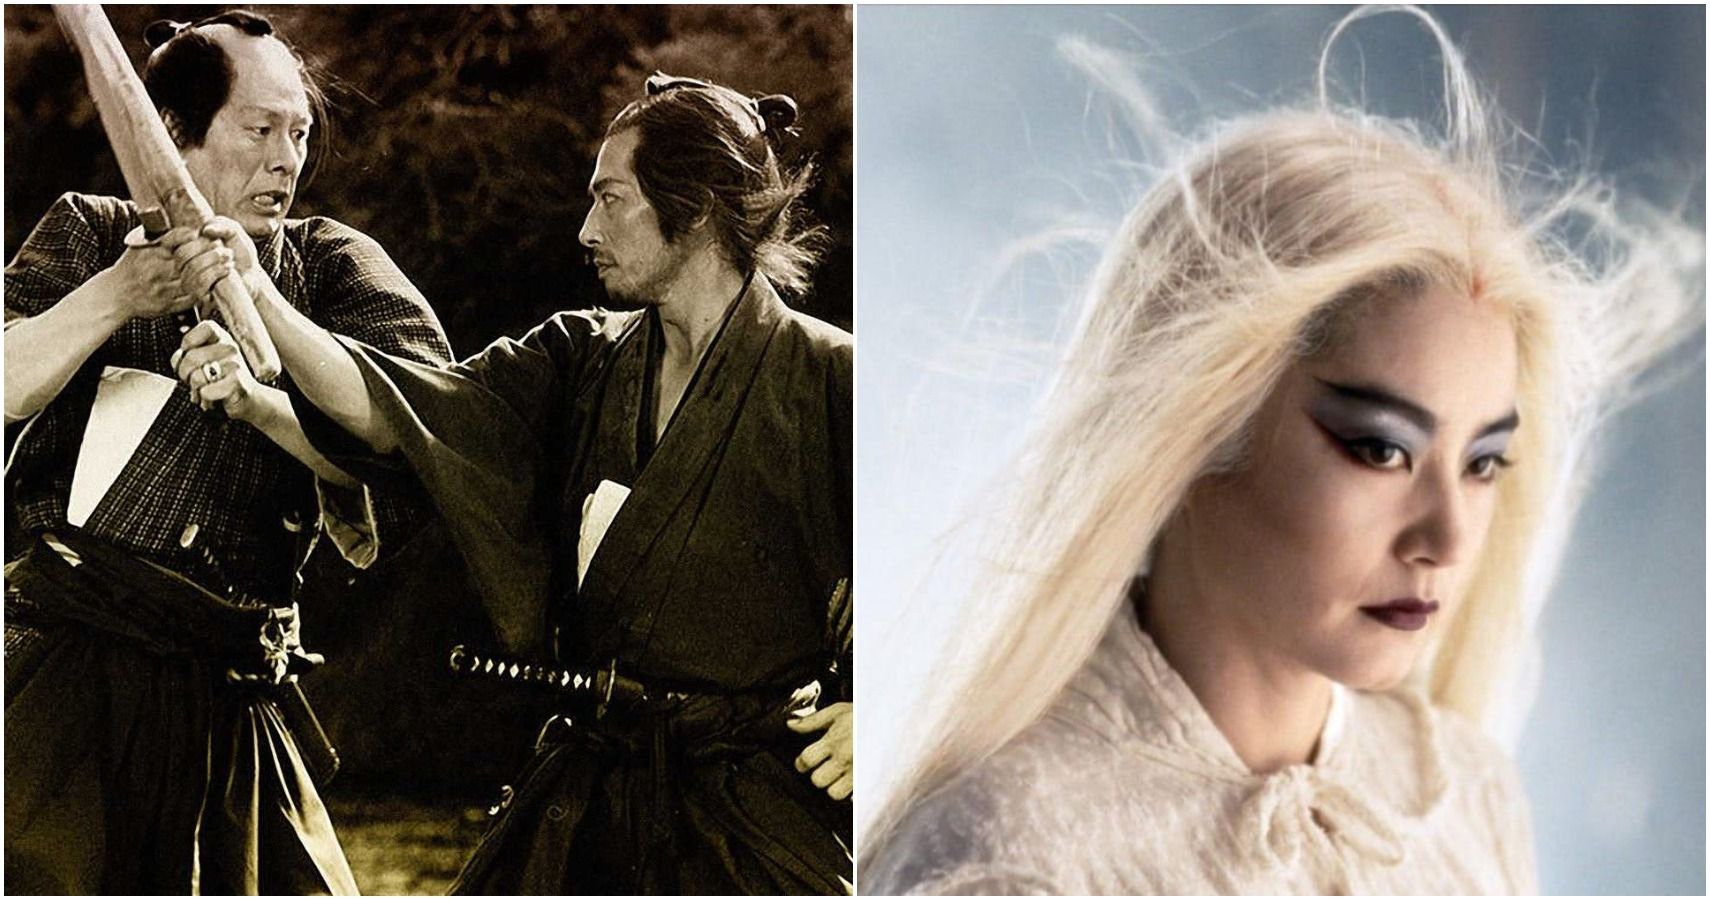 10 Best Martial Arts Movies According To Rotten Tomatoes